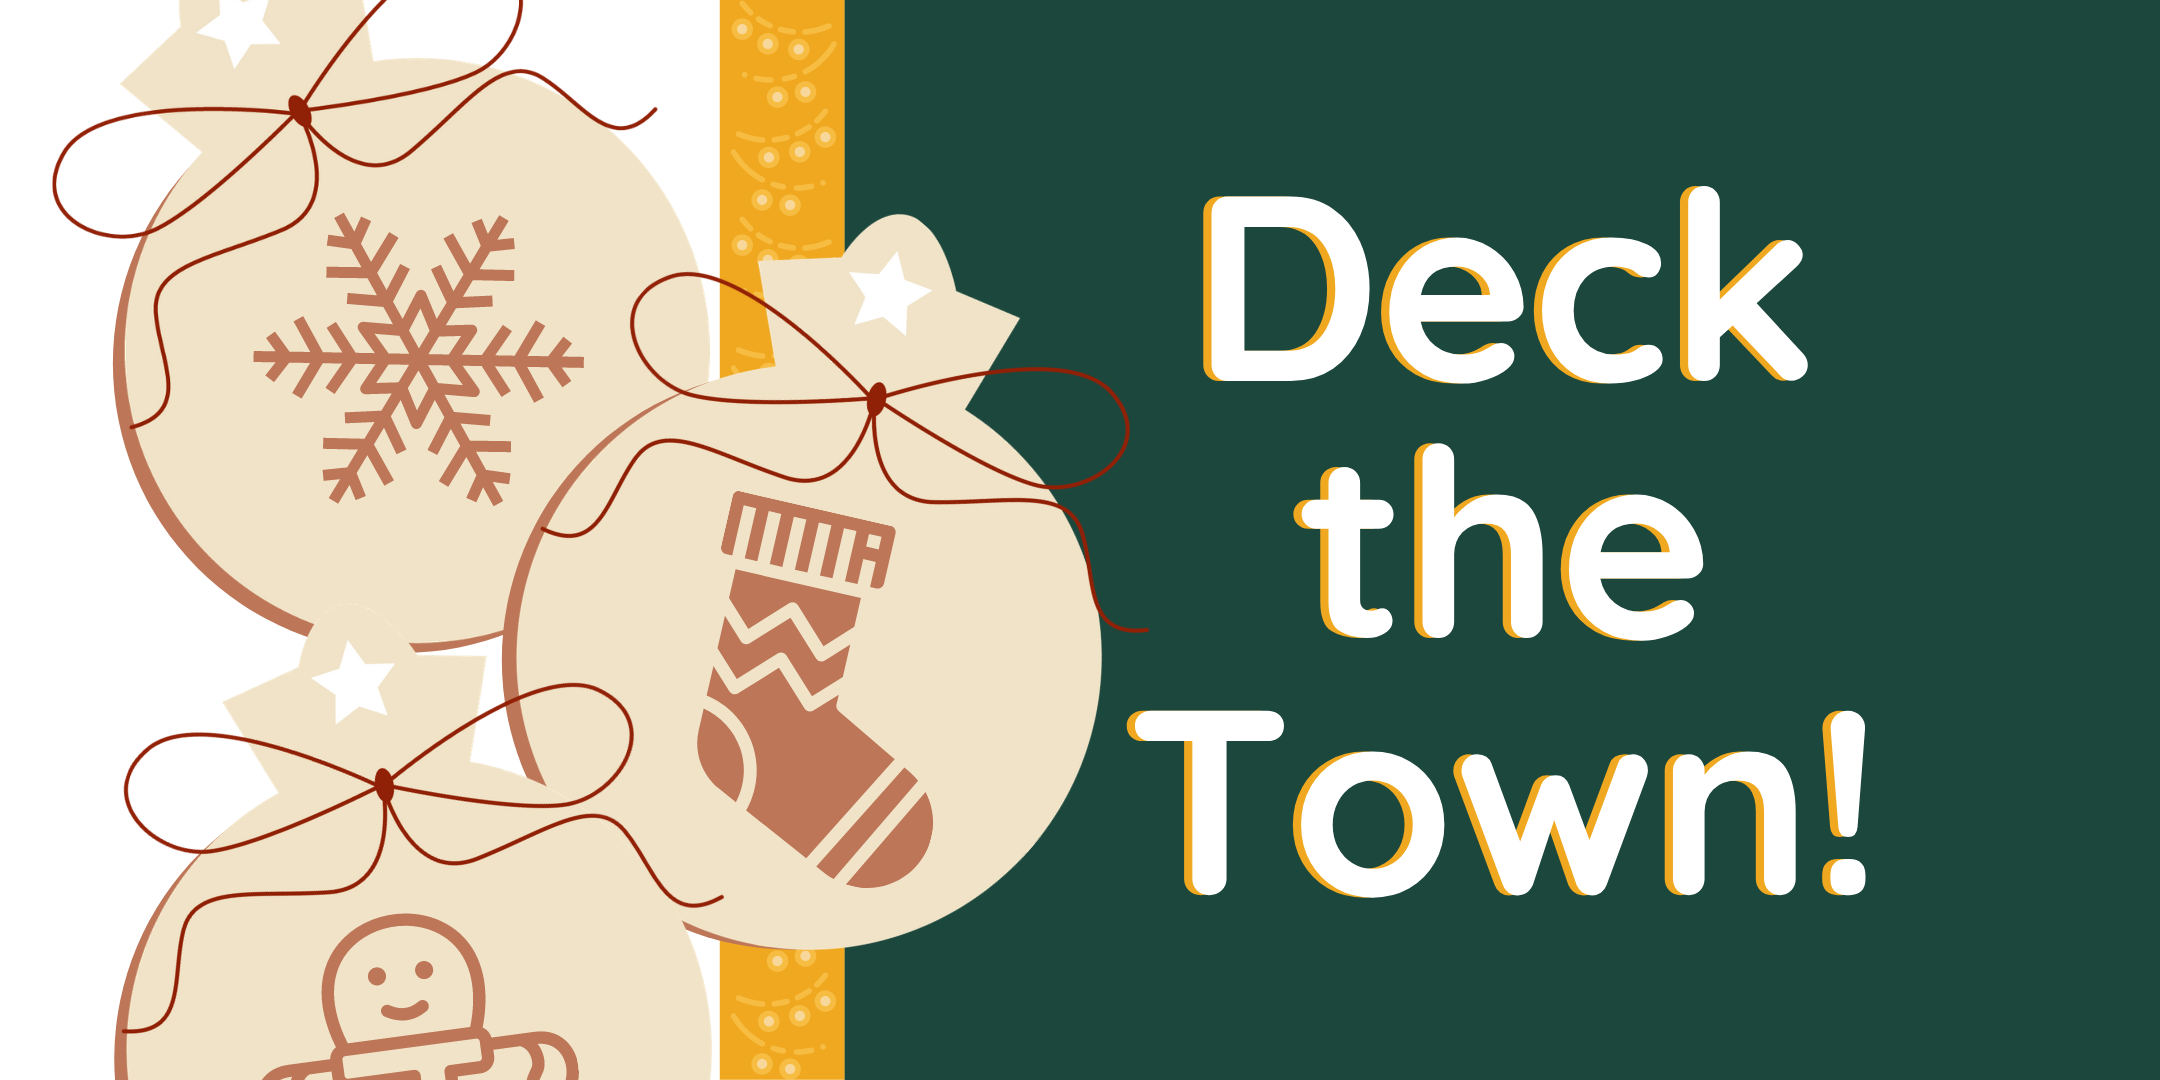 Deck the Town!